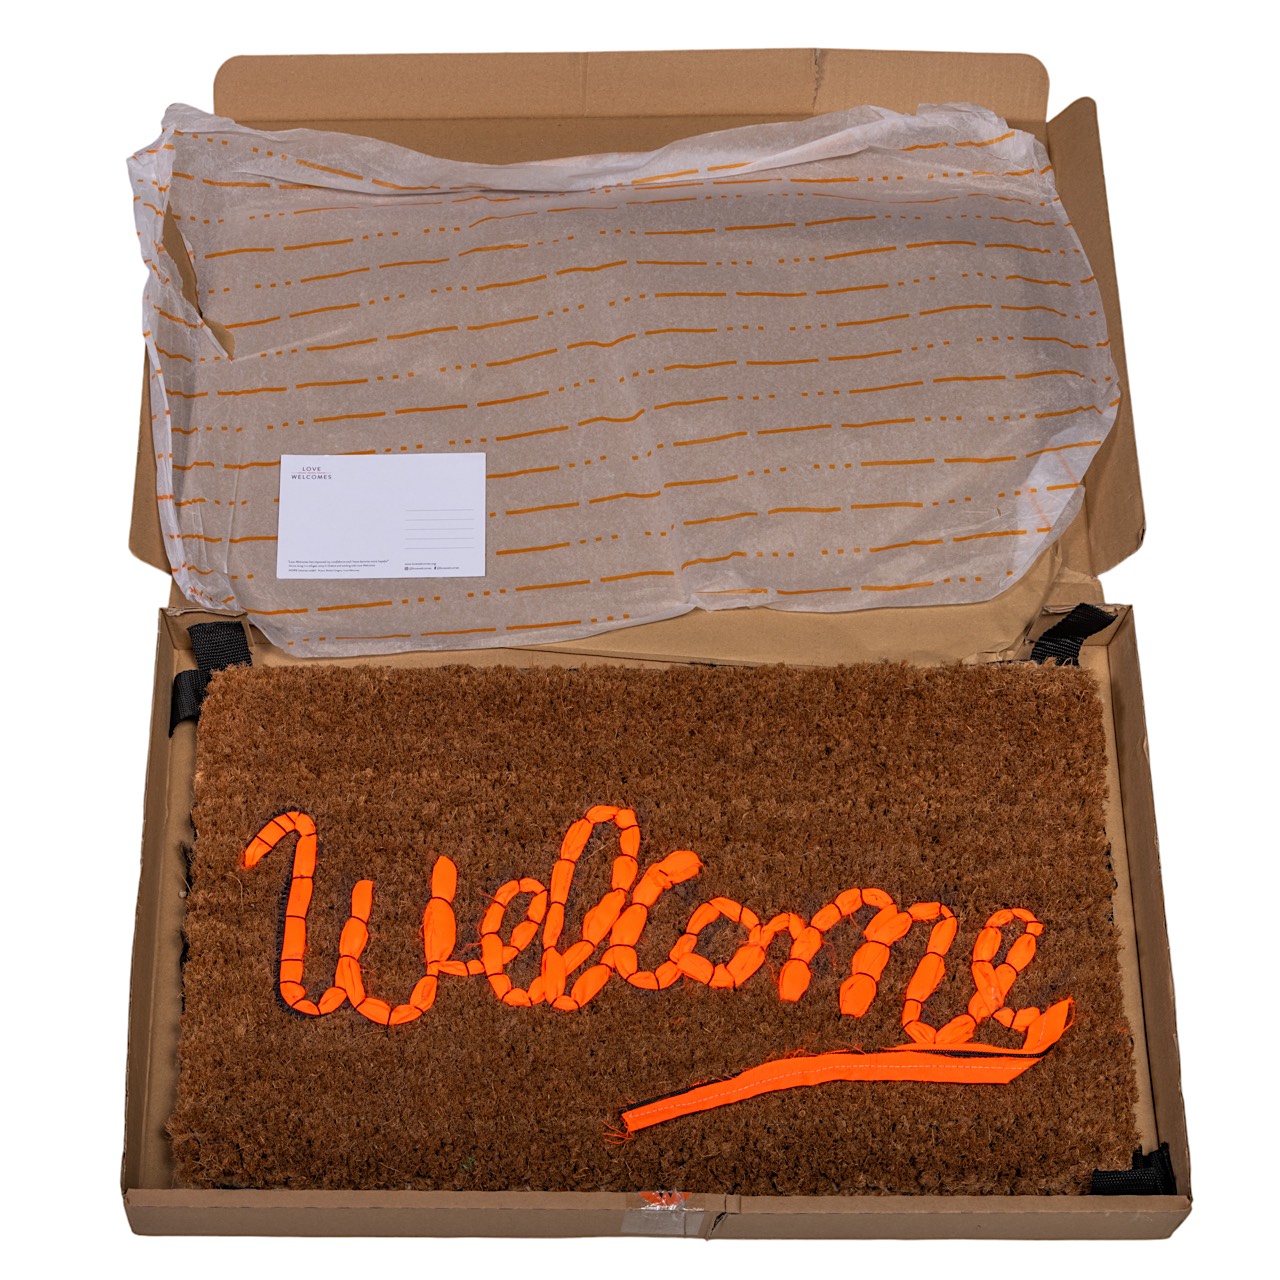 Banksy (1974), Welcome mat, edition by 'Gross Domestic Product', Ndeg 2316 40 x 60 cm. (15 3/4 x 23. - Image 5 of 7